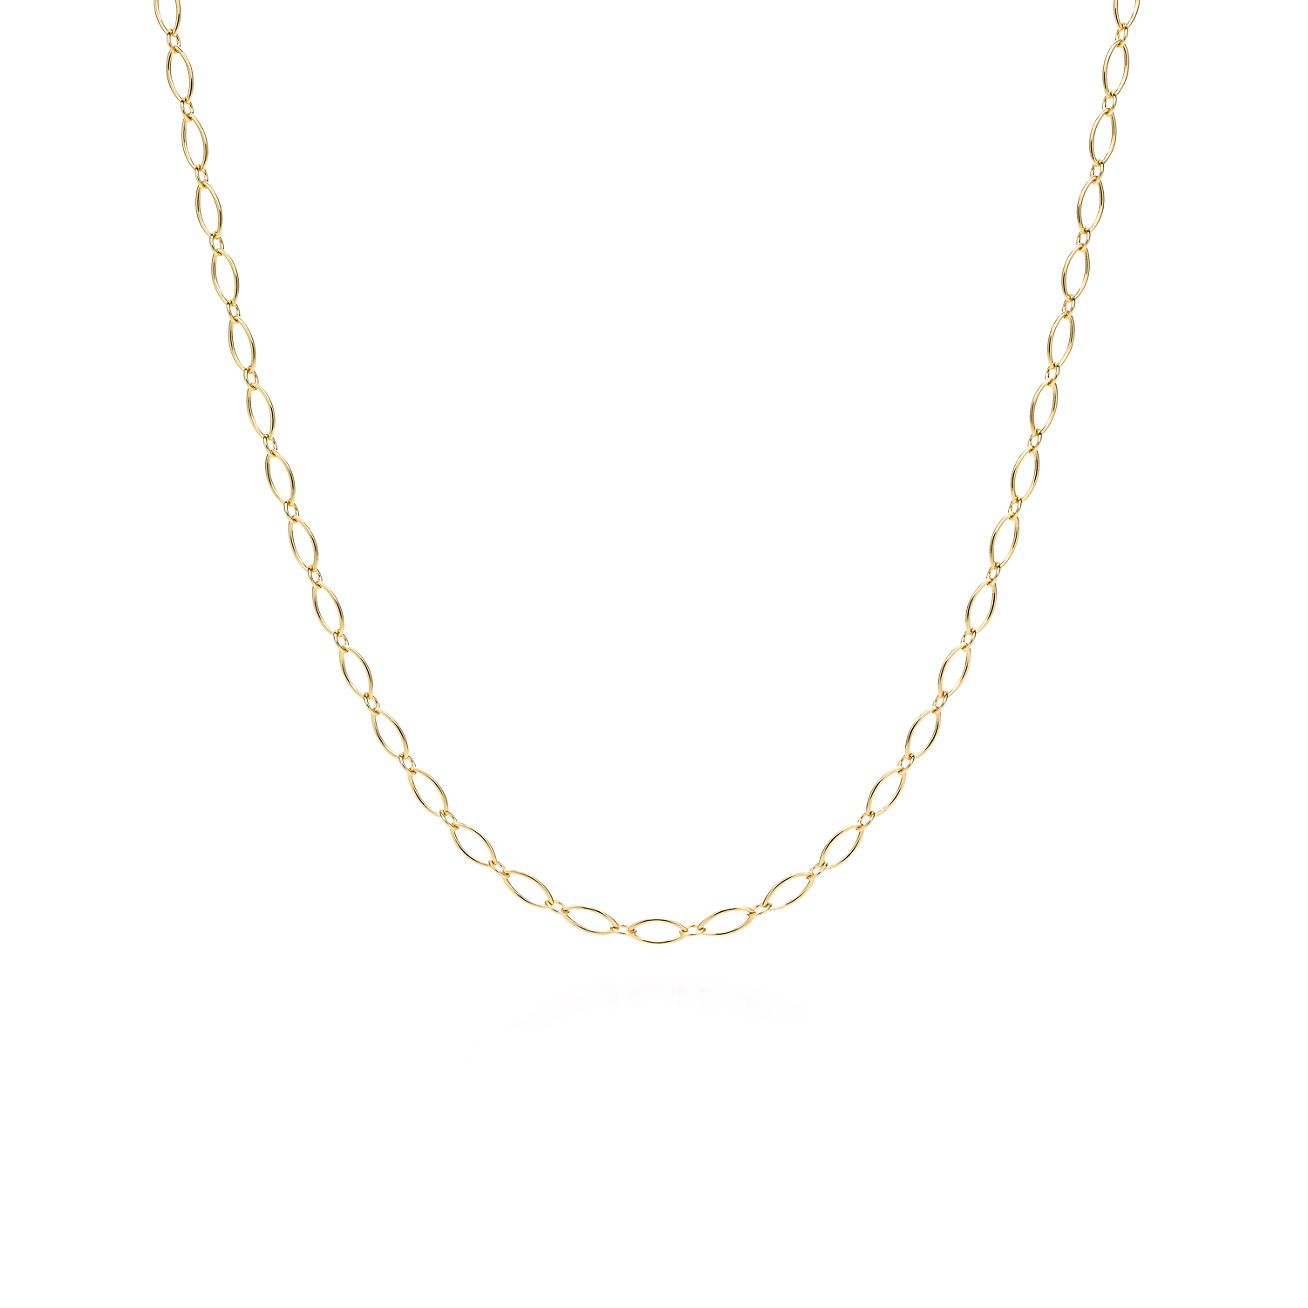 Oval link chain in 18k gold, 16\